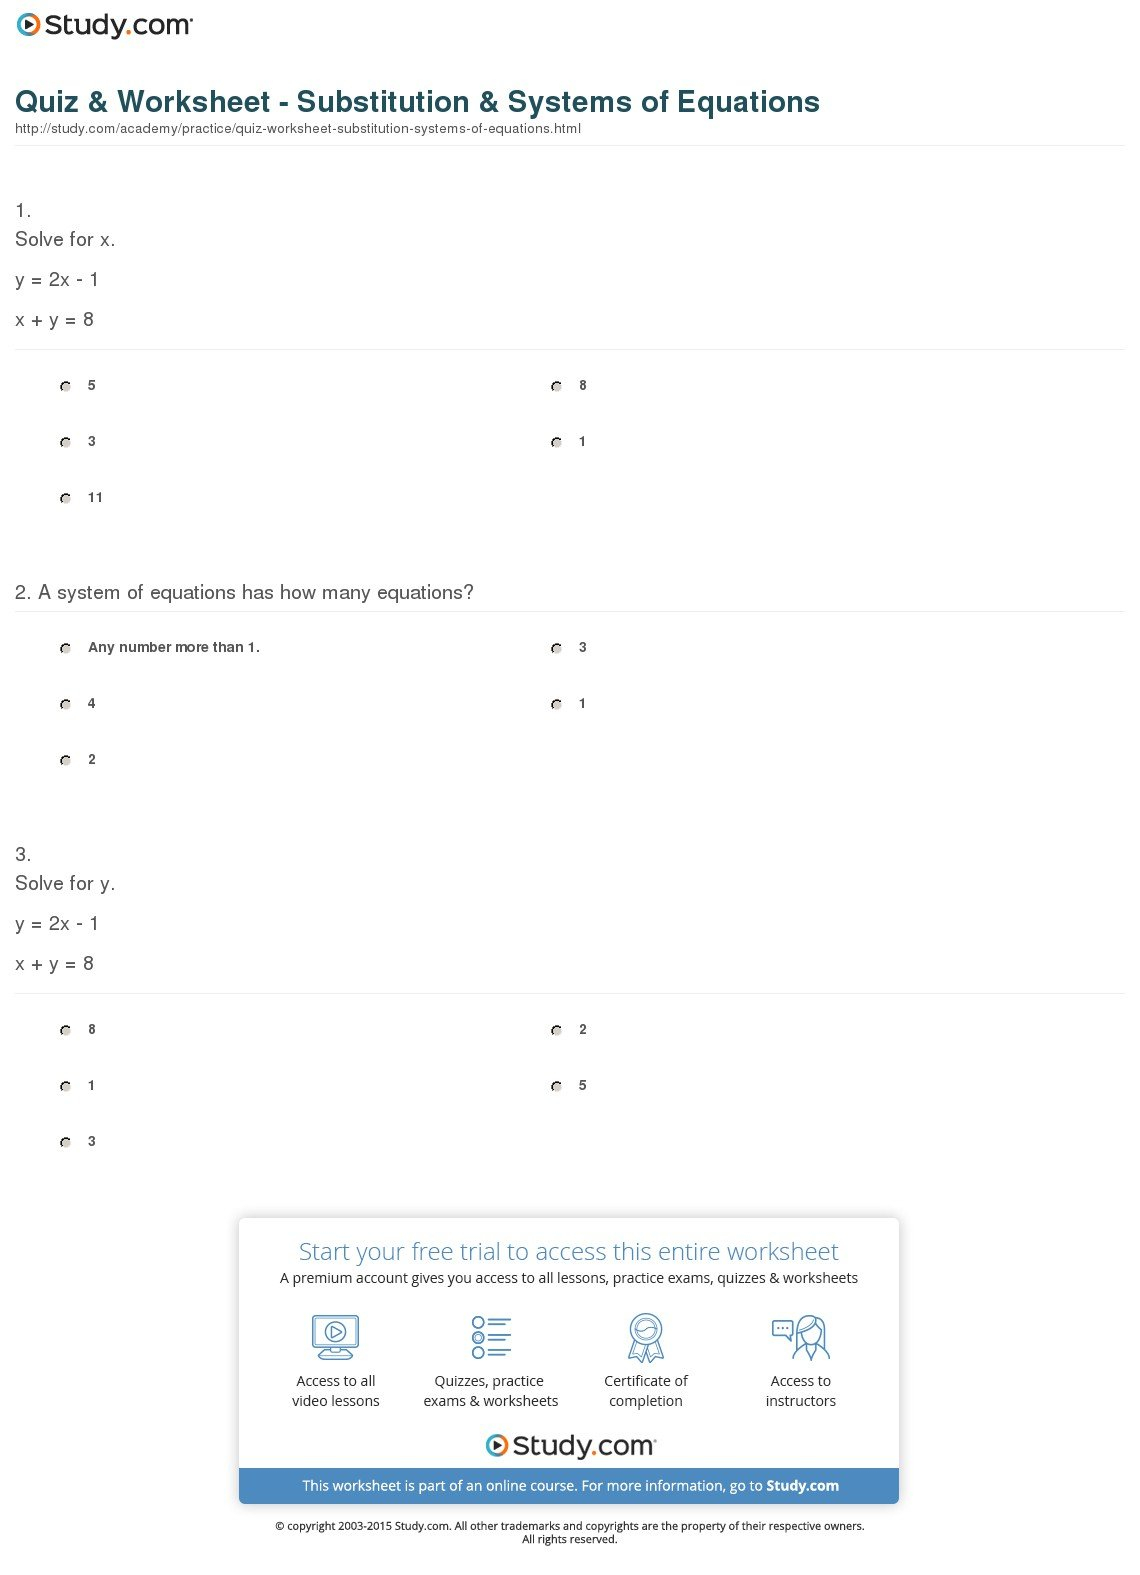 Quiz  Worksheet  Substitution  Systems Of Equations  Study For Systems Of Equations Substitution Worksheet